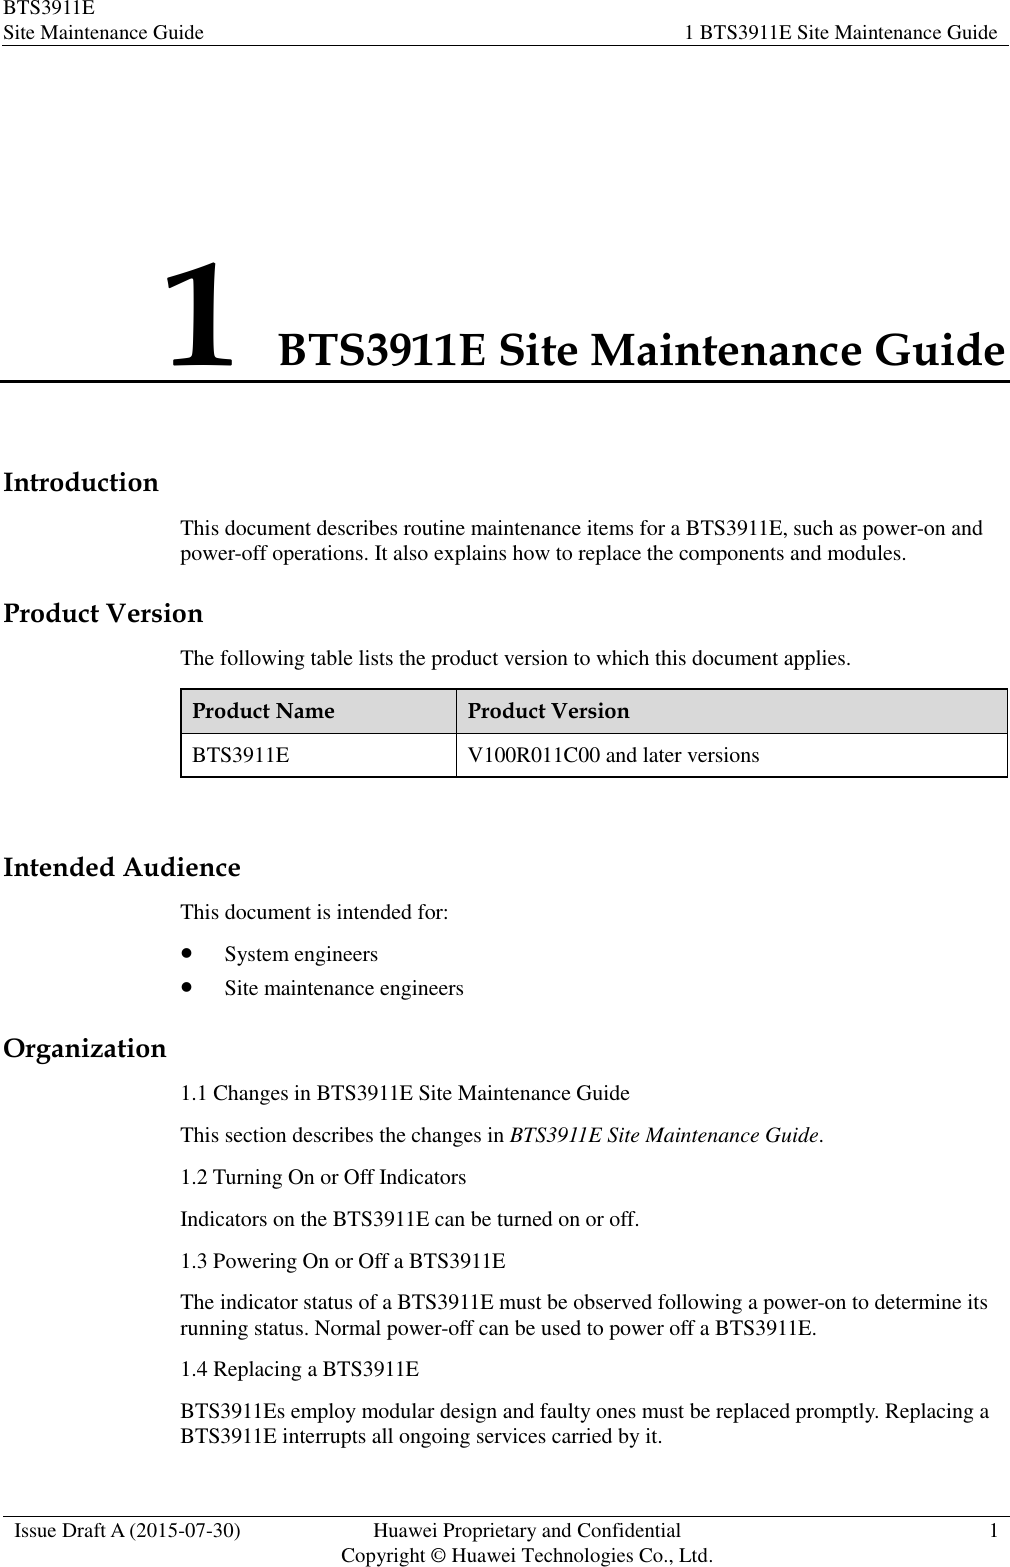 BTS3911E Site Maintenance Guide 1 BTS3911E Site Maintenance Guide  Issue Draft A (2015-07-30) Huawei Proprietary and Confidential           Copyright © Huawei Technologies Co., Ltd. 1  1 BTS3911E Site Maintenance Guide Introduction This document describes routine maintenance items for a BTS3911E, such as power-on and power-off operations. It also explains how to replace the components and modules. Product Version The following table lists the product version to which this document applies. Product Name Product Version BTS3911E V100R011C00 and later versions  Intended Audience This document is intended for:  System engineers  Site maintenance engineers Organization 1.1 Changes in BTS3911E Site Maintenance Guide This section describes the changes in BTS3911E Site Maintenance Guide. 1.2 Turning On or Off Indicators Indicators on the BTS3911E can be turned on or off. 1.3 Powering On or Off a BTS3911E The indicator status of a BTS3911E must be observed following a power-on to determine its running status. Normal power-off can be used to power off a BTS3911E. 1.4 Replacing a BTS3911E BTS3911Es employ modular design and faulty ones must be replaced promptly. Replacing a BTS3911E interrupts all ongoing services carried by it. 